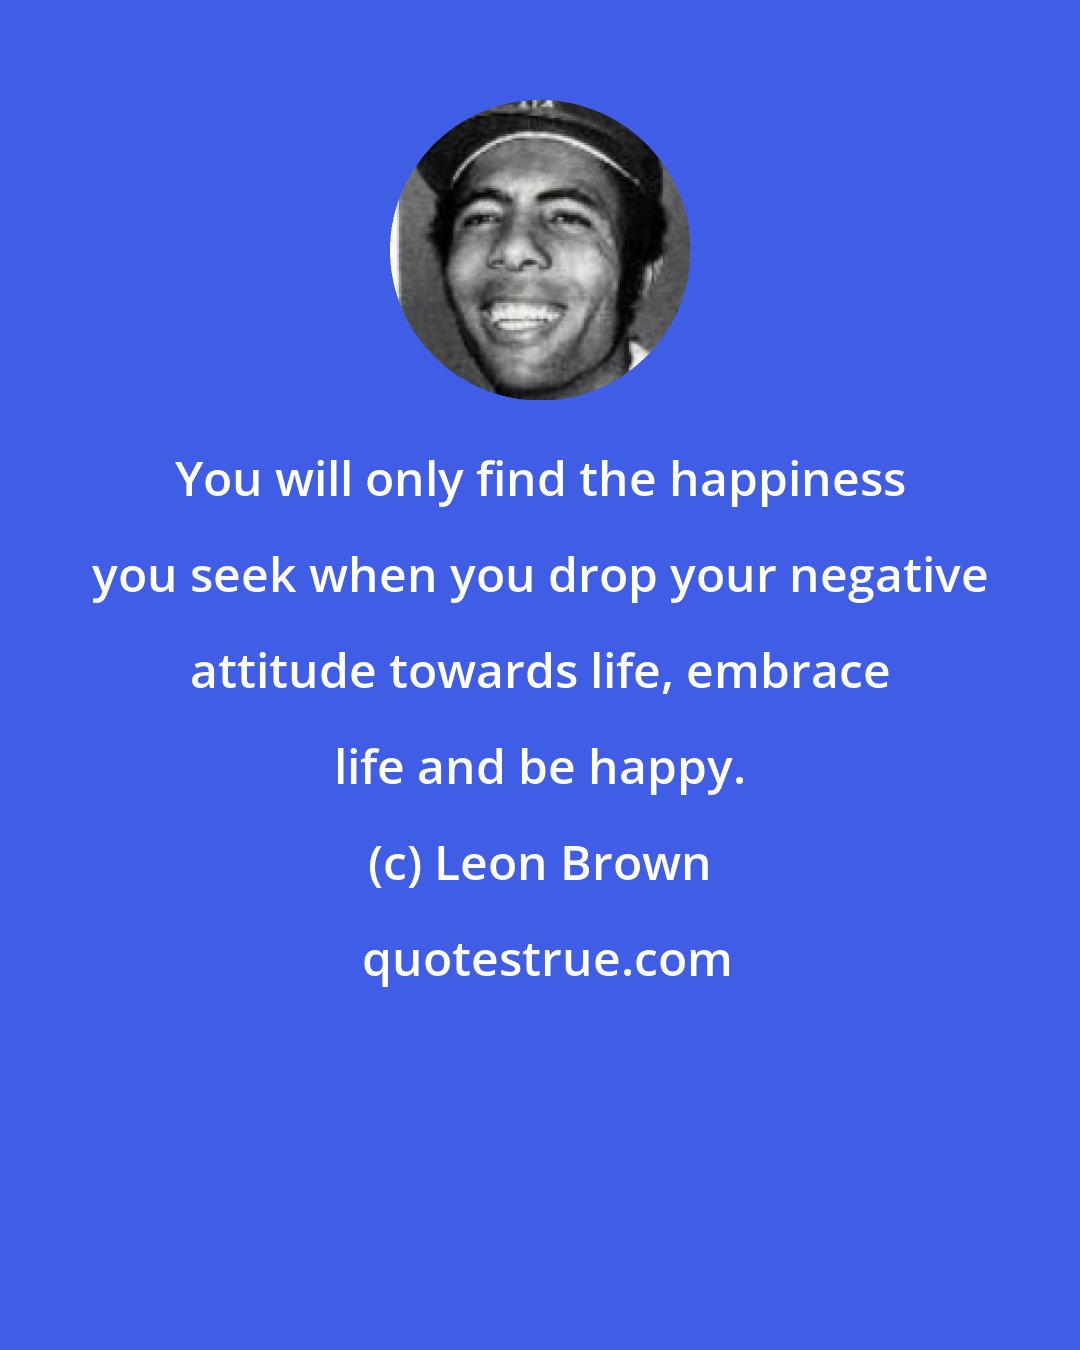 Leon Brown: You will only find the happiness you seek when you drop your negative attitude towards life, embrace life and be happy.